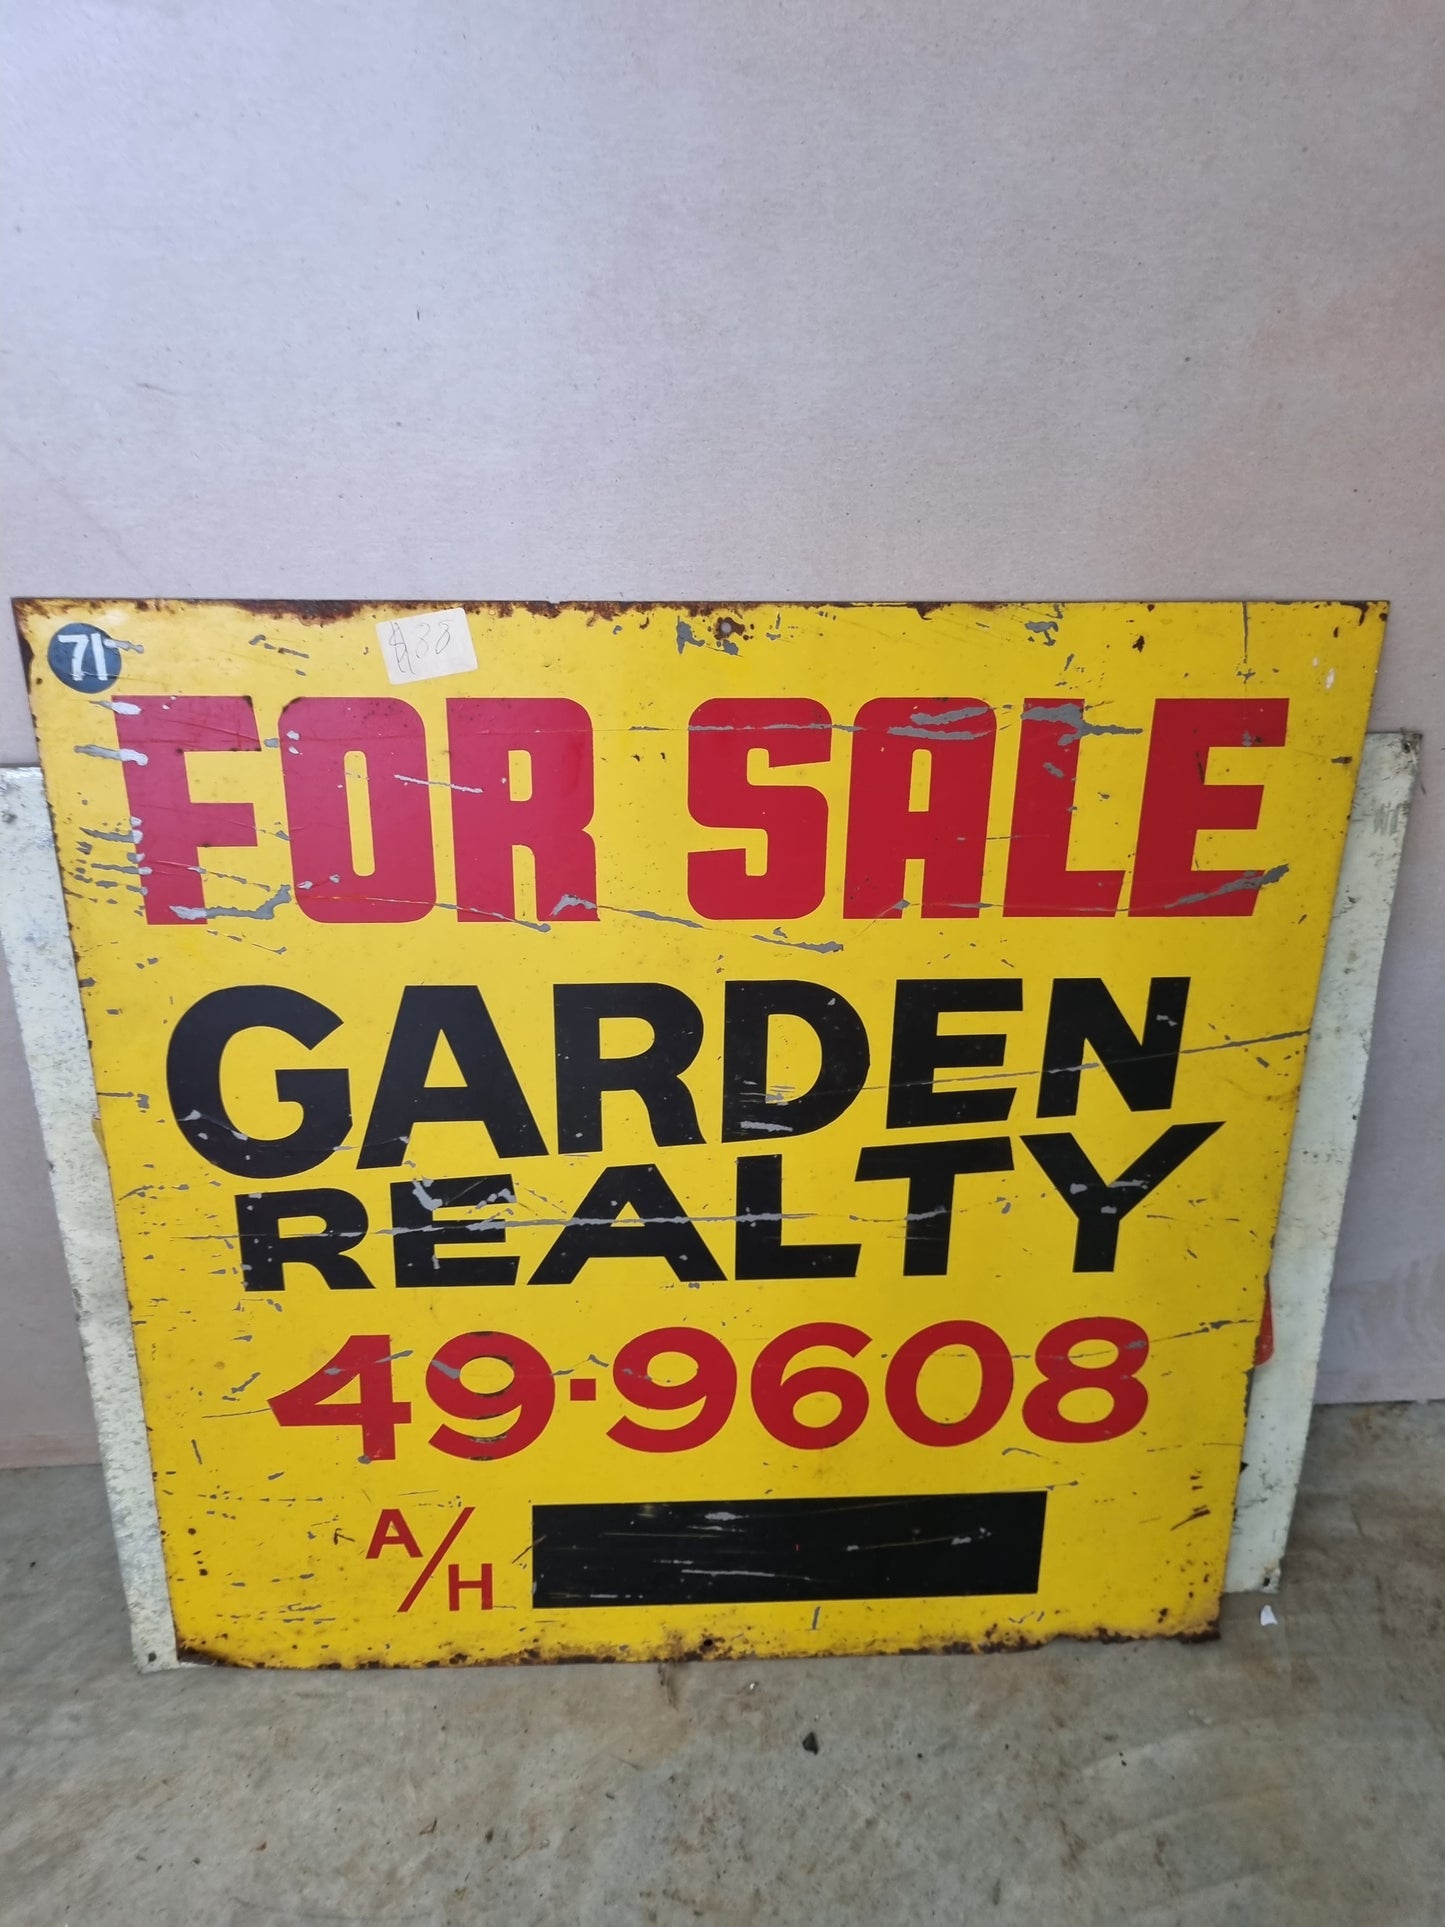 Vintage realty sign, tin mancave